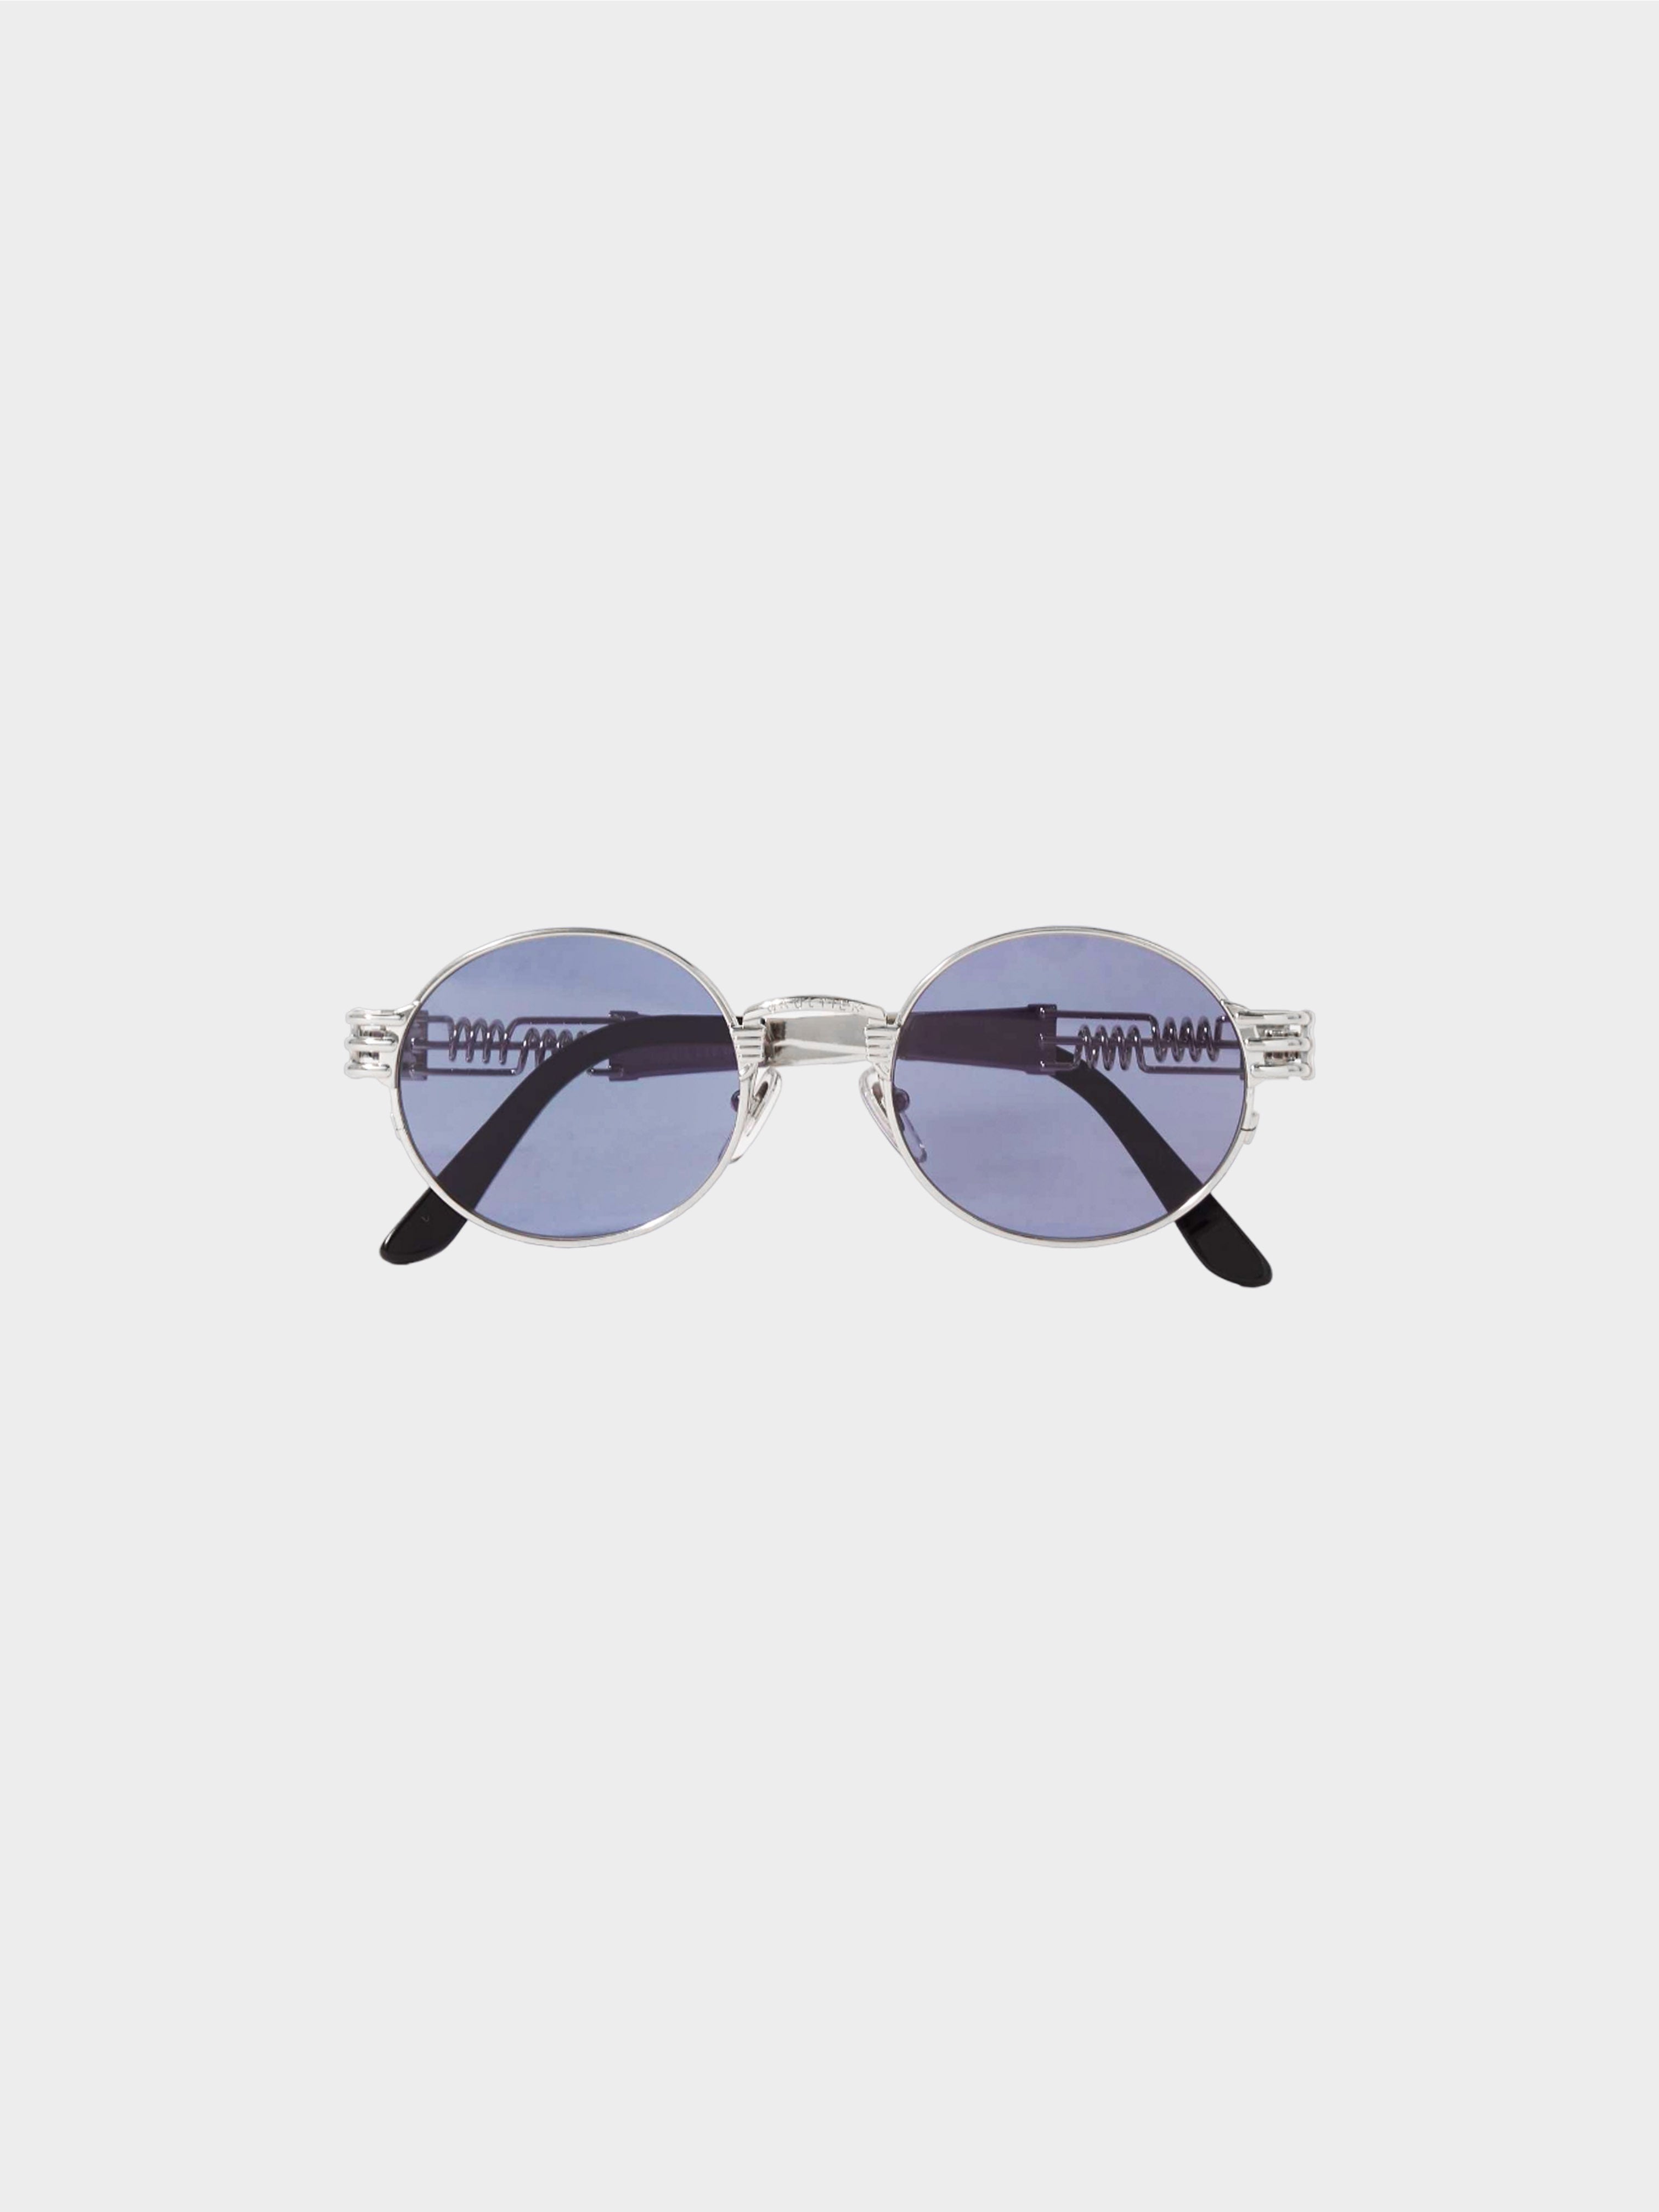 Jean Paul Gaultier 1990s Limited Edition KB9 Spring Frame Sunglasses